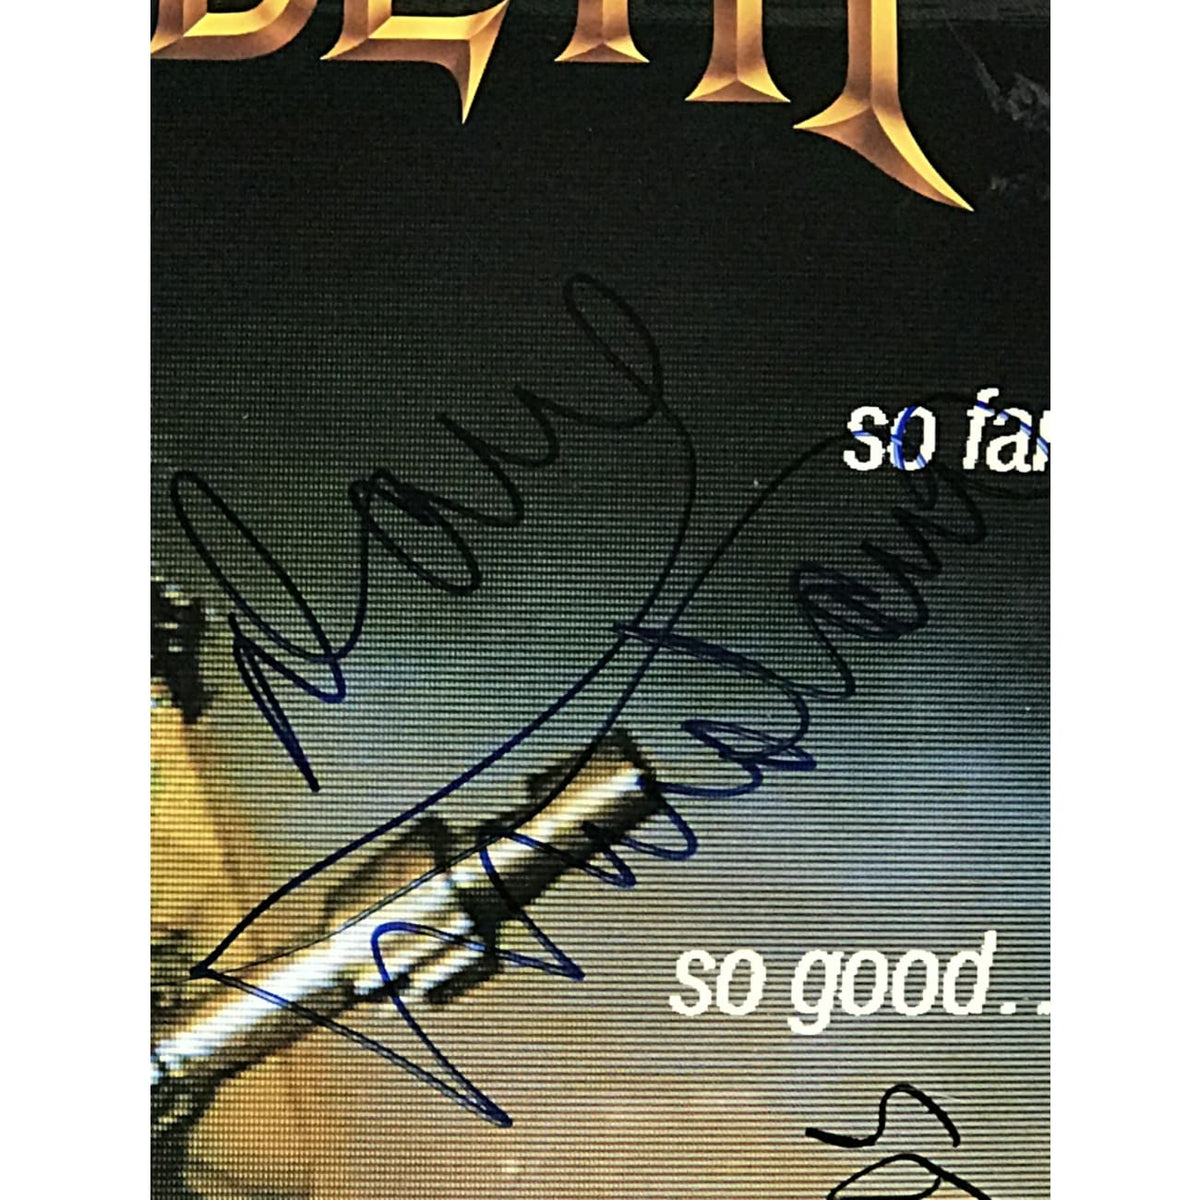 Megadeth Album So Far, So Good Signed by Dave Mustaine and the